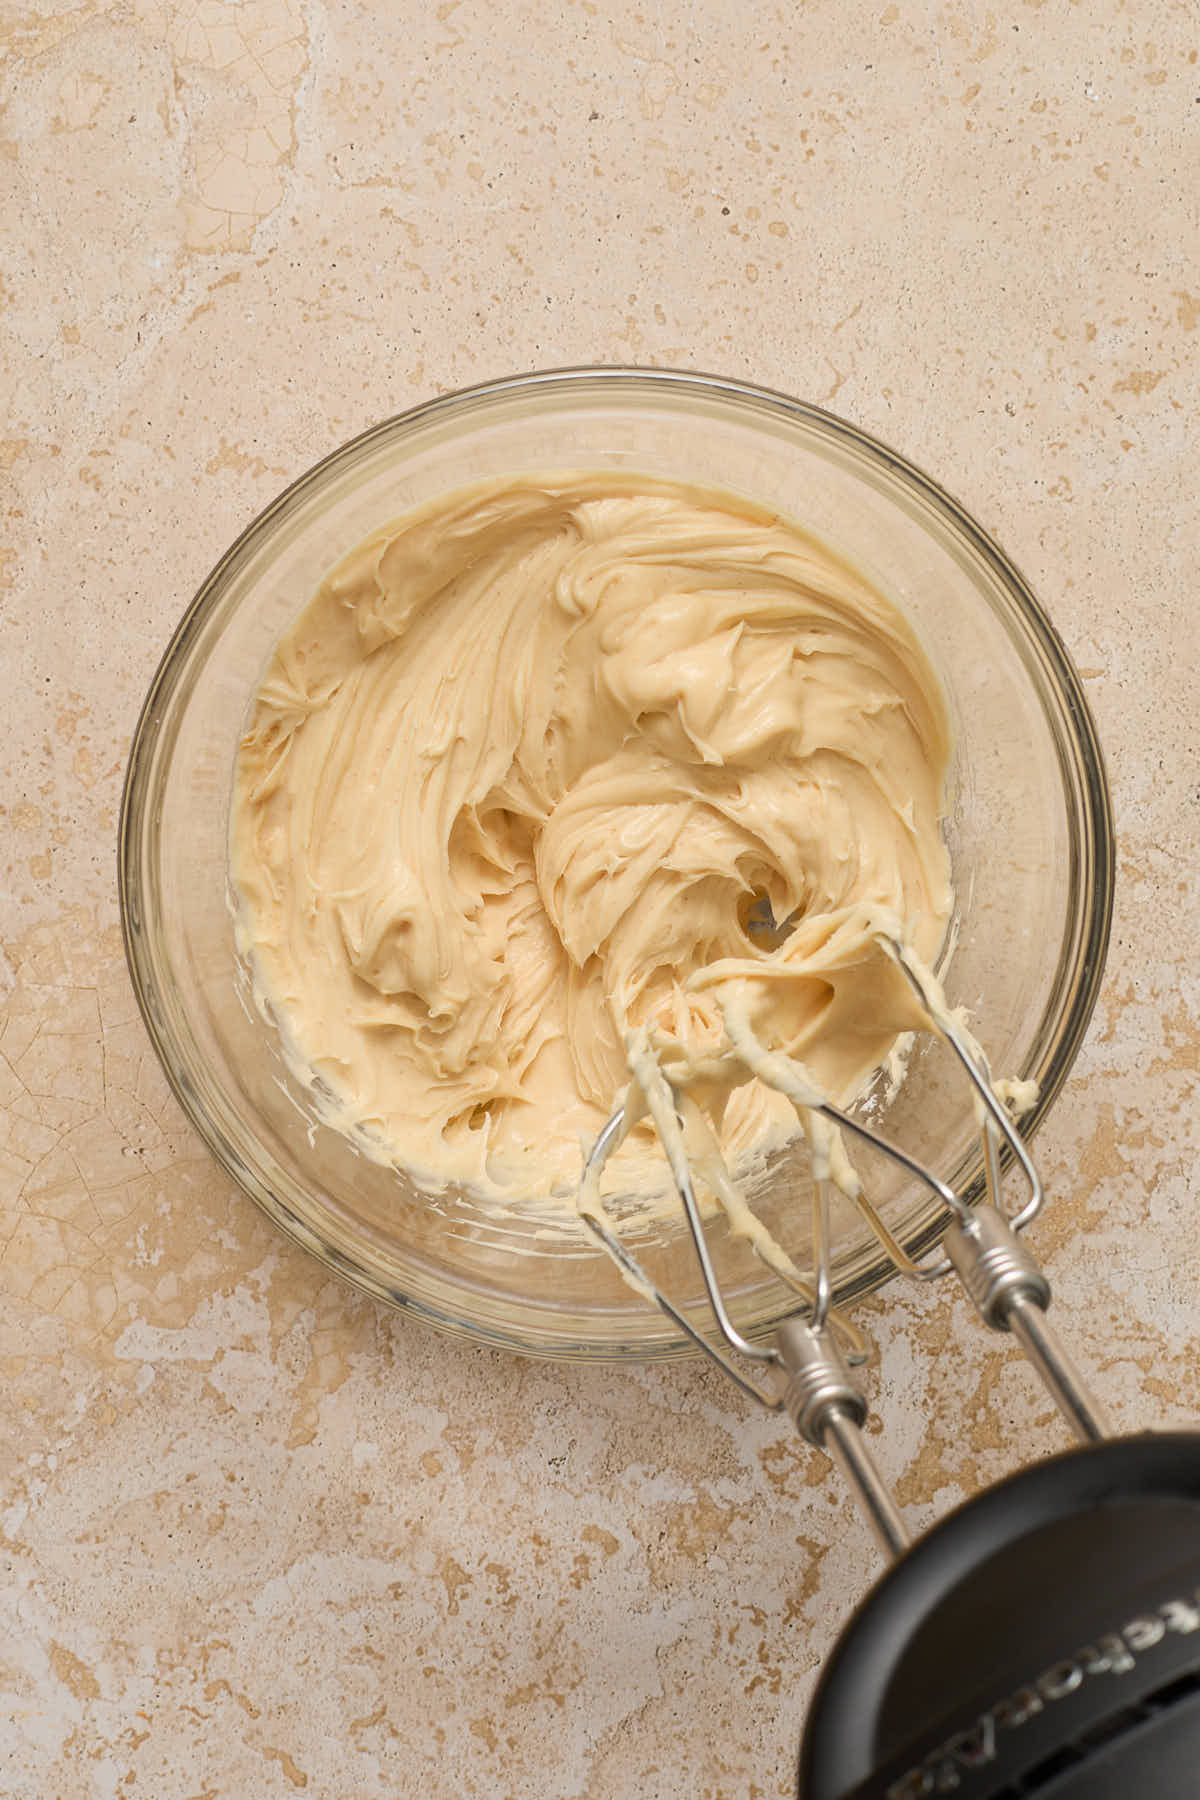 Frosting whipped together in a glass bowl with electric beaters.